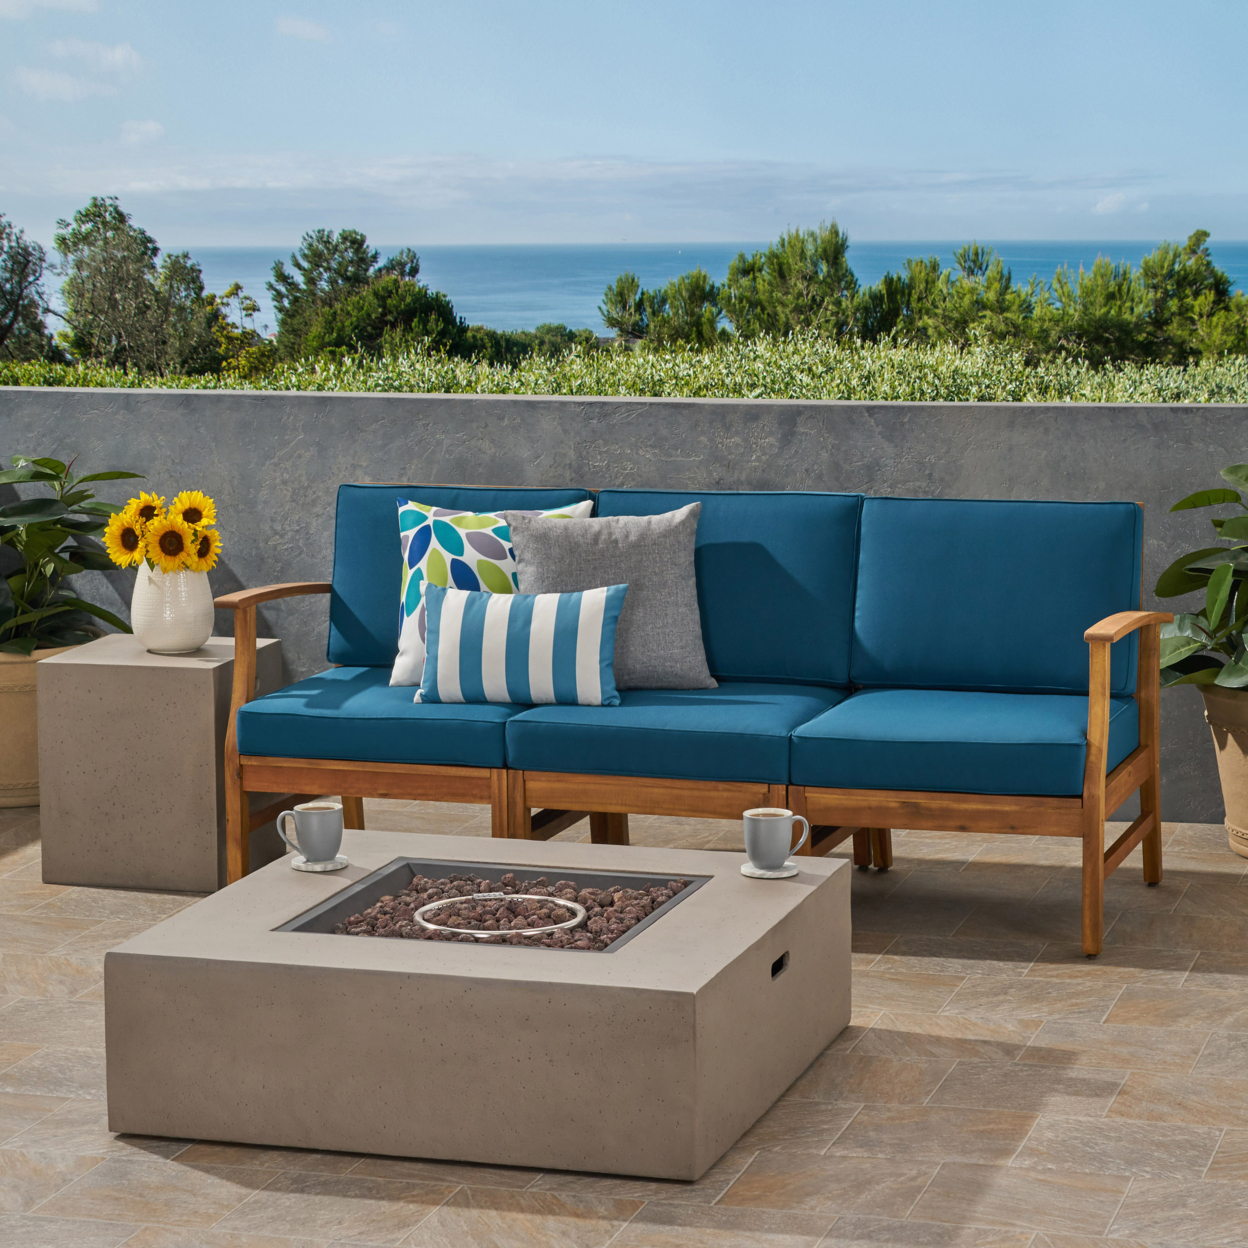 Sydney Outdoor 3 Seater Acacia Wood Sofa Set With Rectangular Fire Table And Tank Holder - Teak + Blue + Light Gray